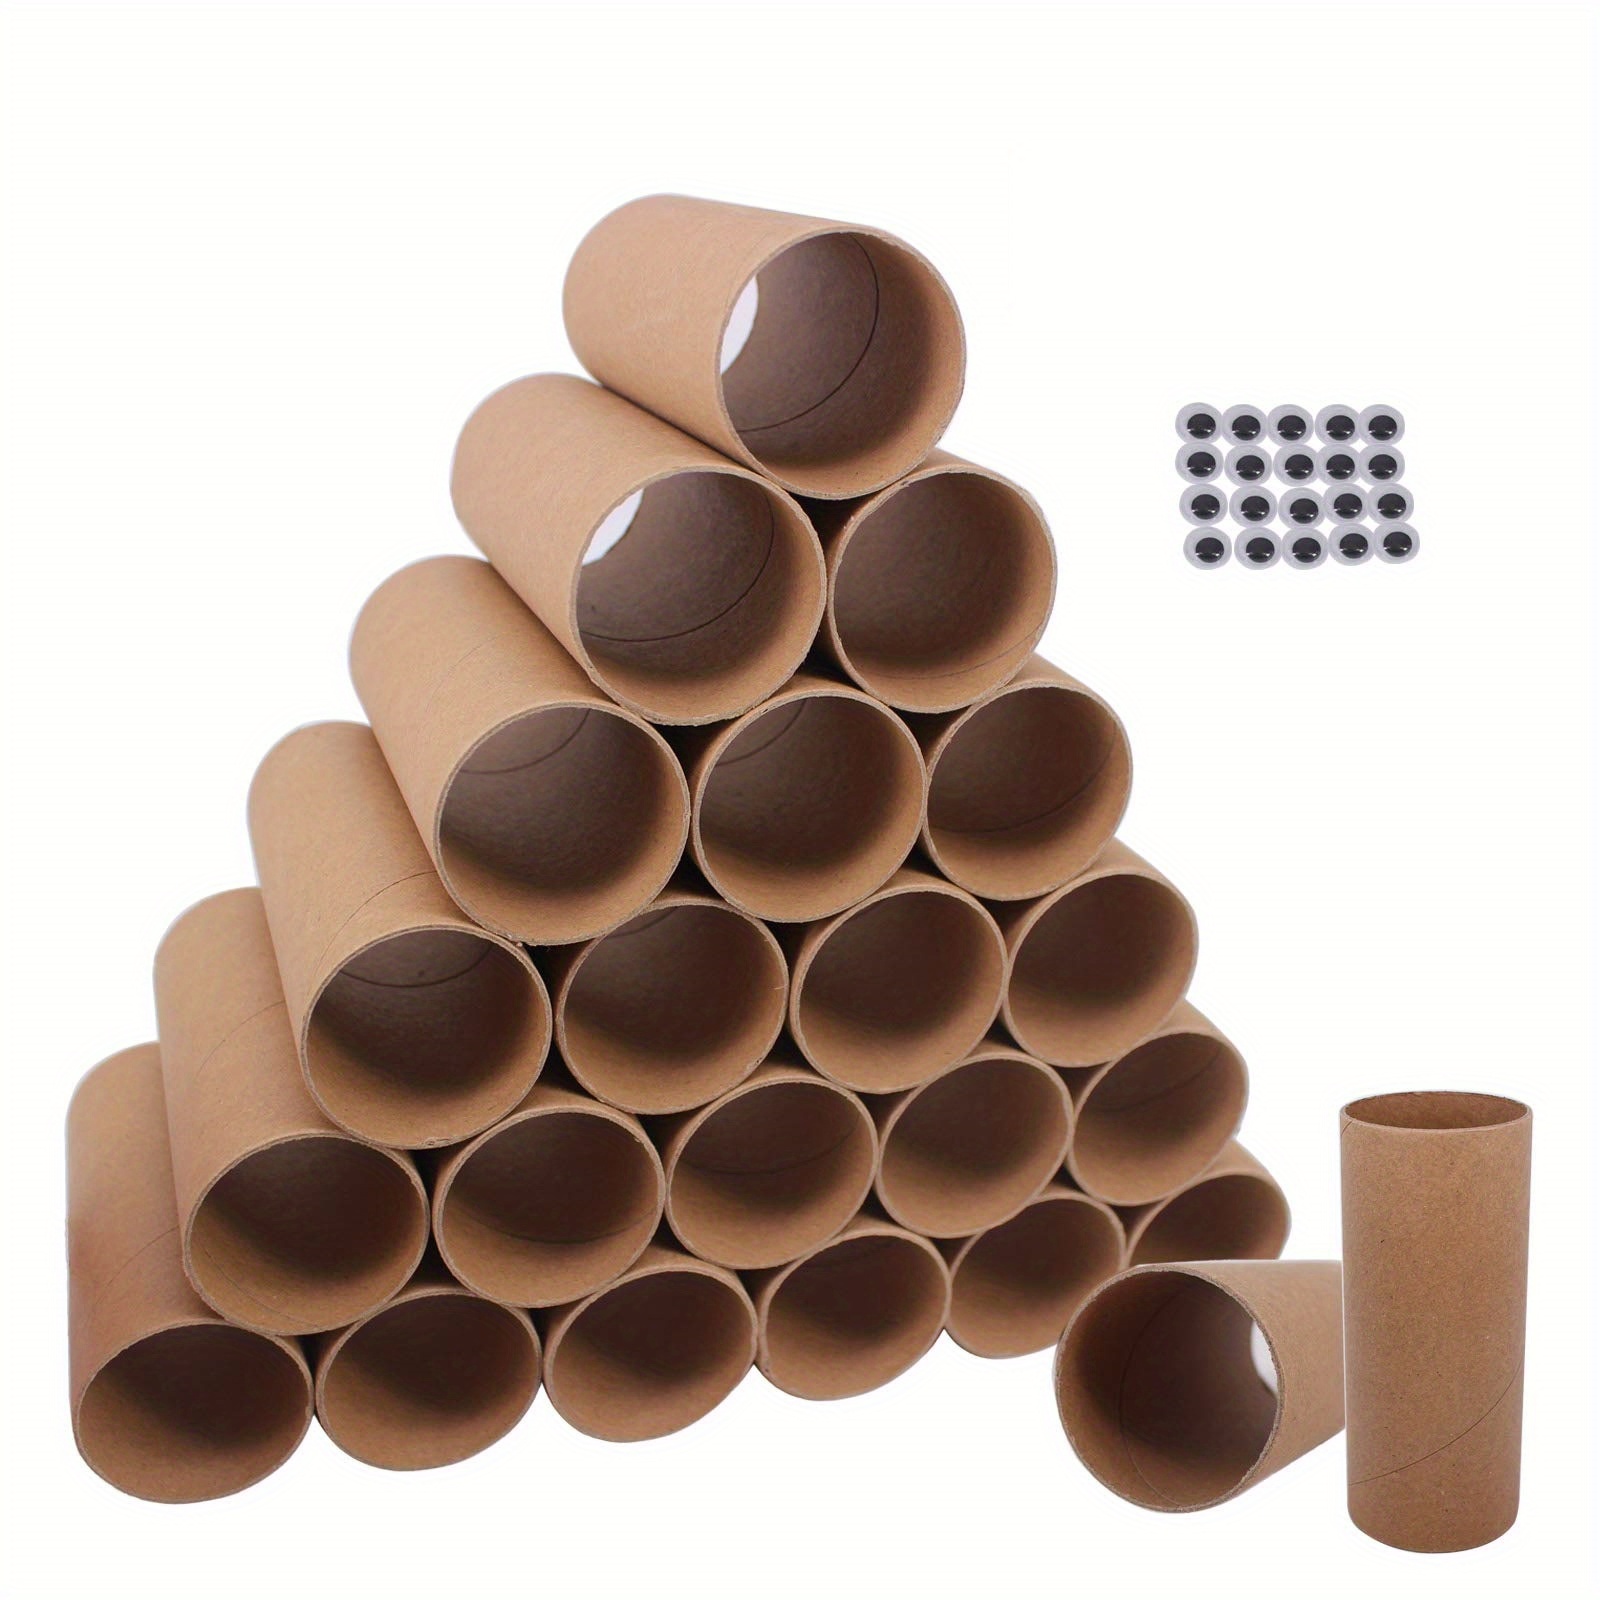 Cardboard Tubes for Arts & Crafts - 3.125 x 1.75 Thick and Sturdy - 10 CT